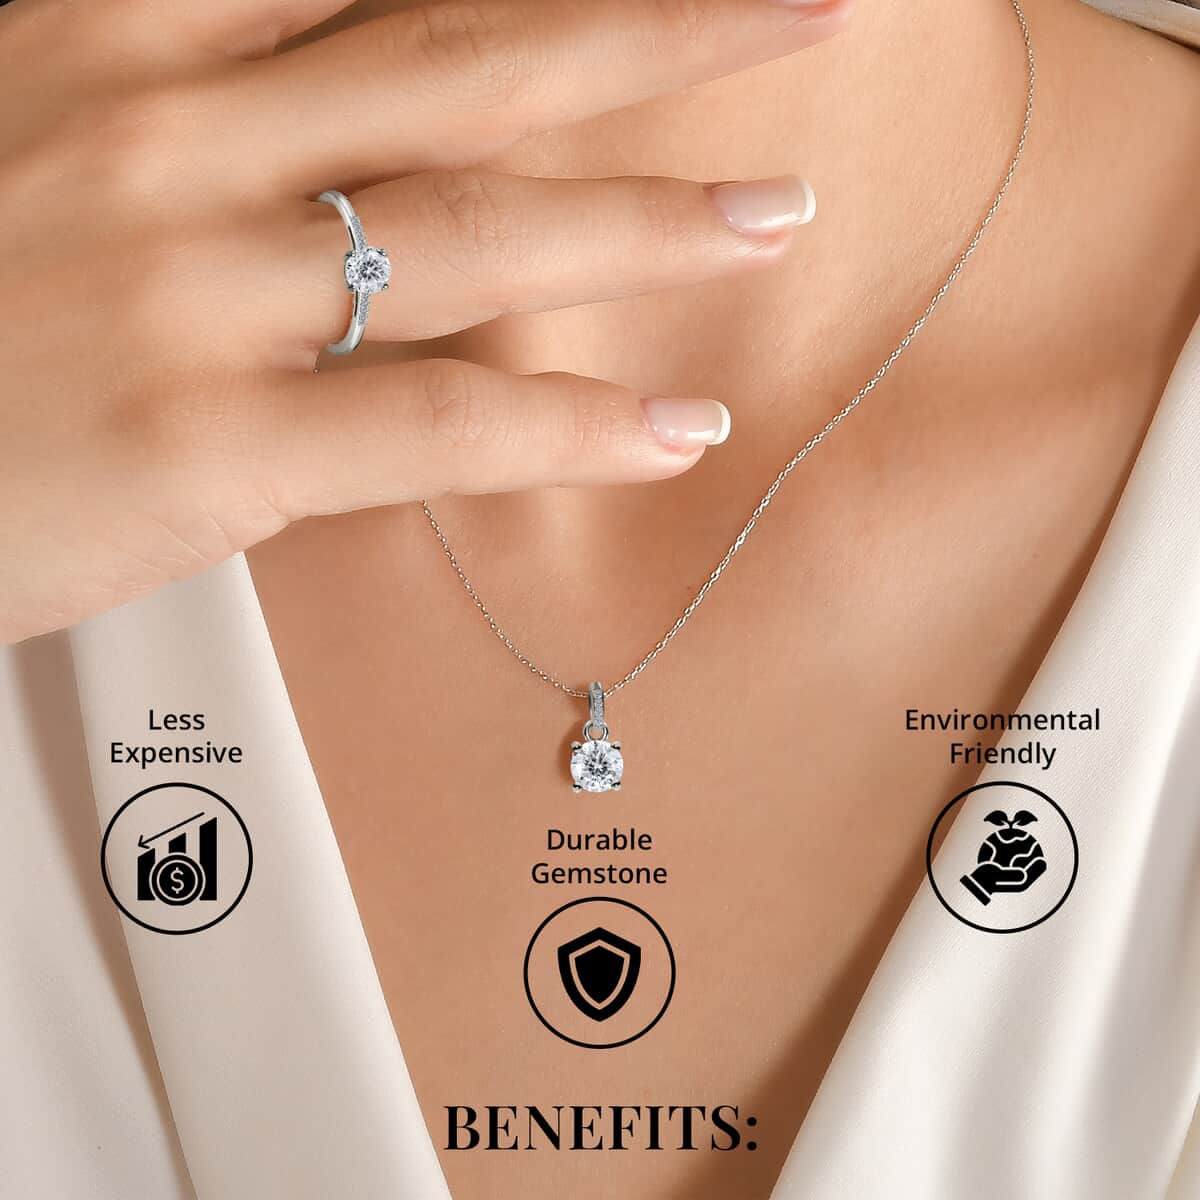 100 Facets Moissanite 1.65 ctw Solitaire Ring (Size 10.00) and Pendant Set in Platinum Over Sterling Silver, Moissanite Solitaire Ring, Moissanite Stud Earrings, Jewelry Set For Her image number 3